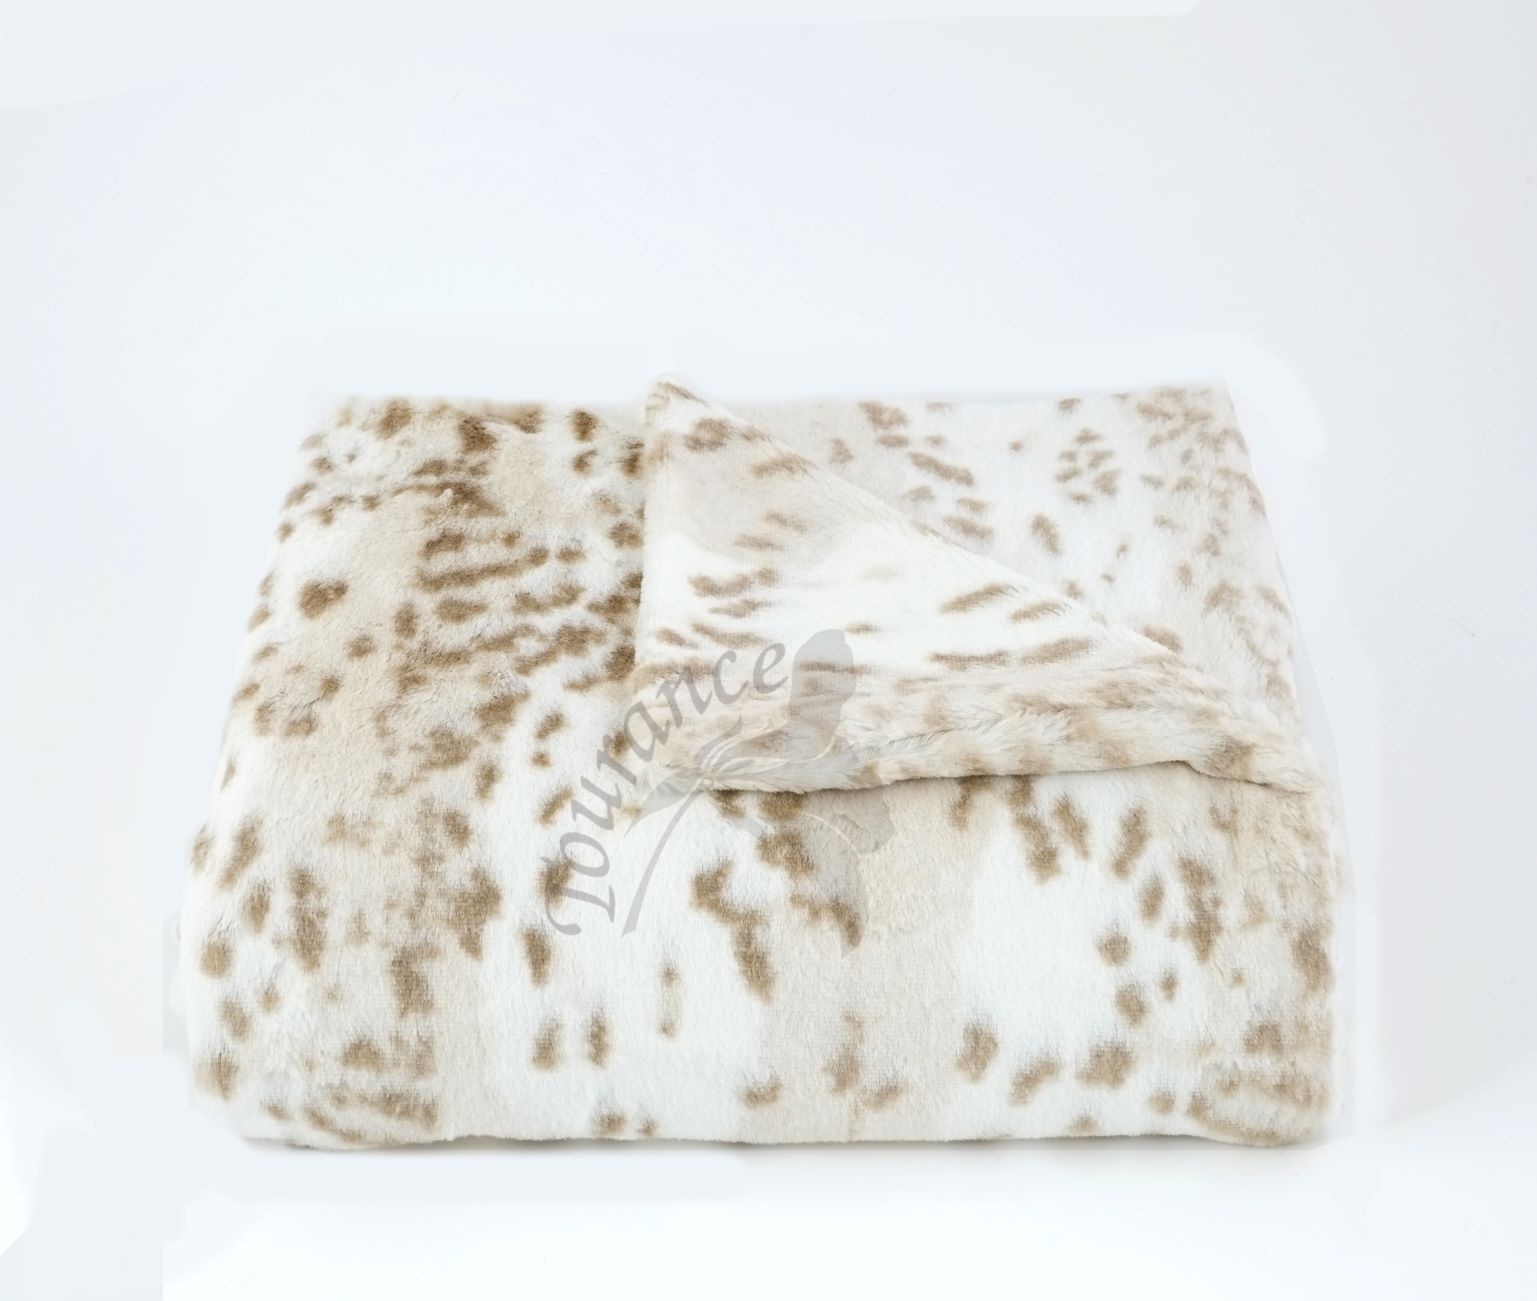 Snow Leopard Creamy Brown Throw with watermark